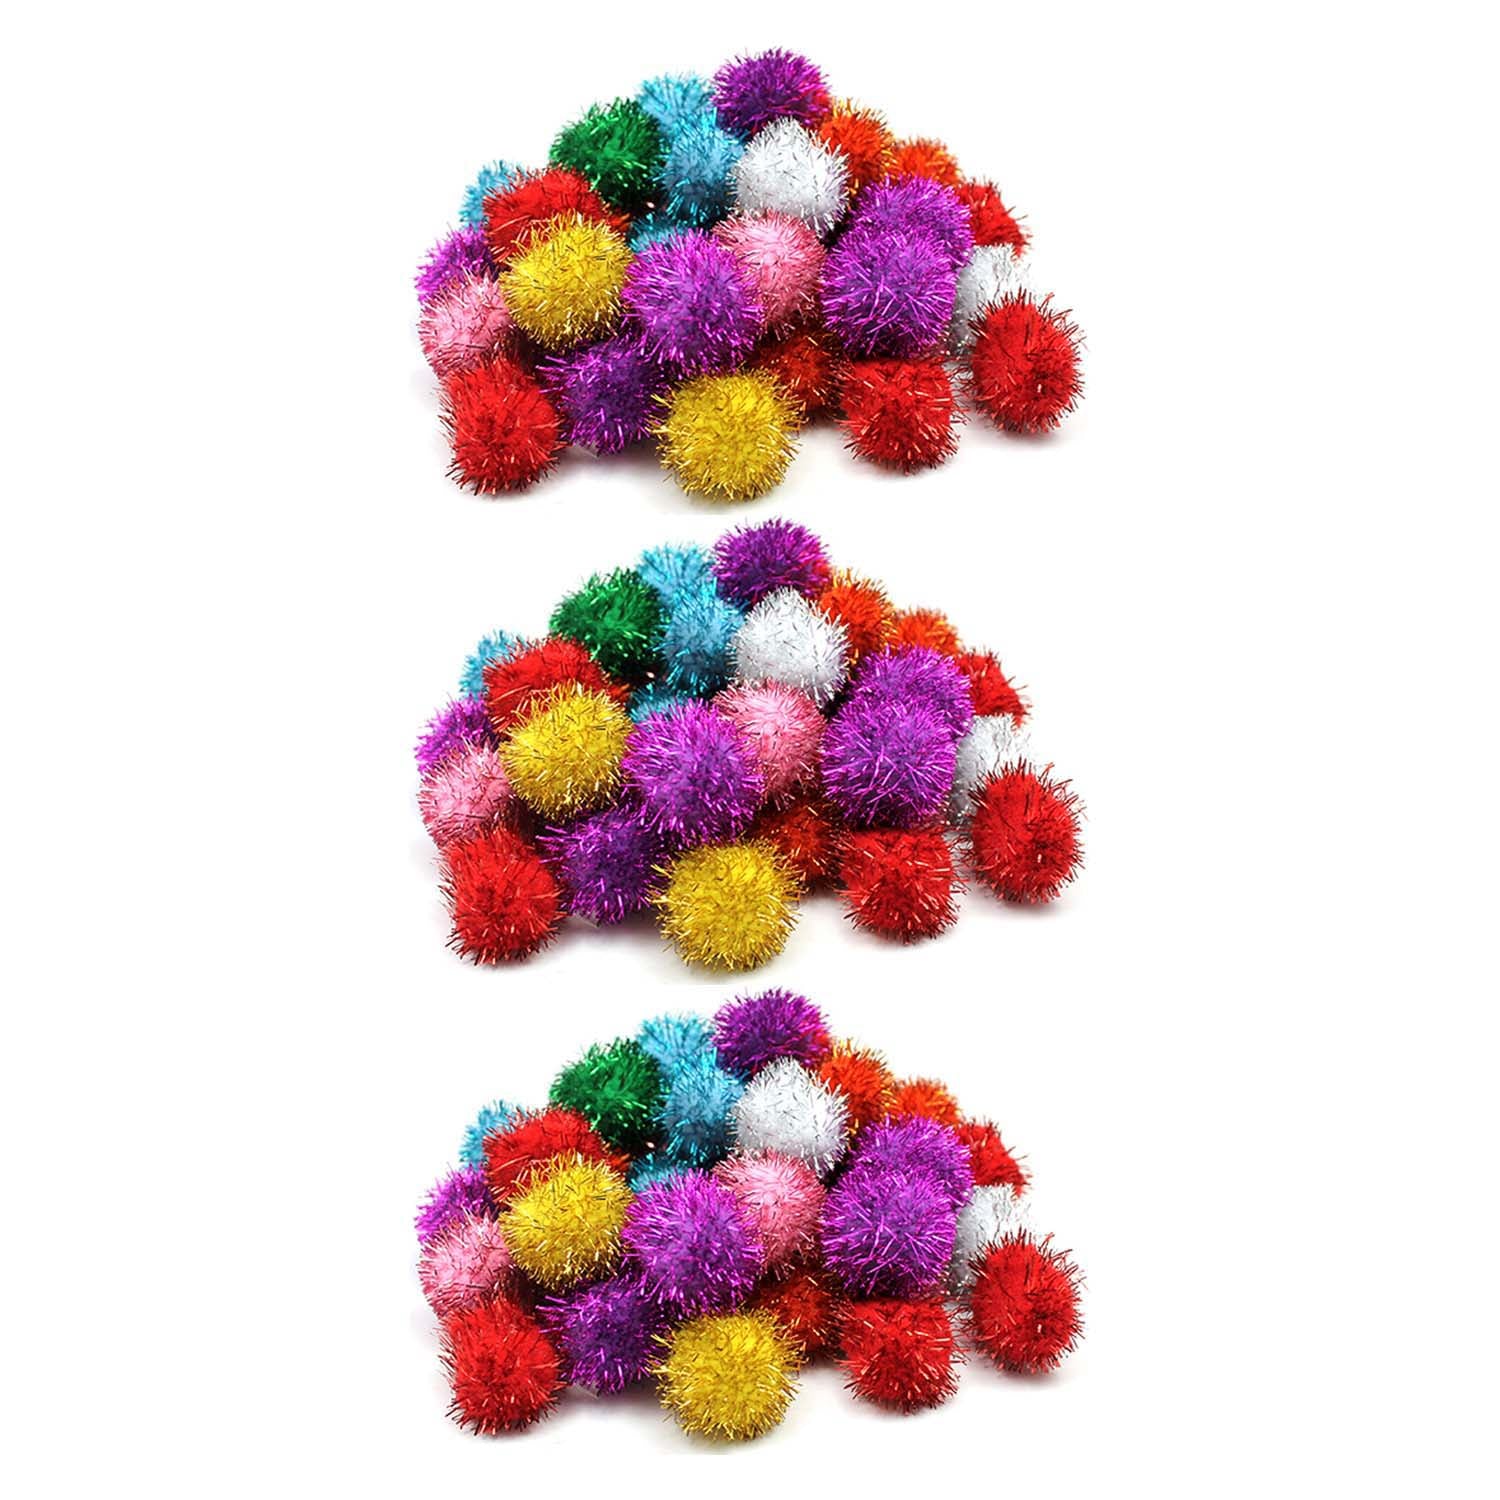 Glitter Pom Pons, Assorted Colors, 1", 40 Pieces Per Pack, 3 Pack - A1 School Supplies